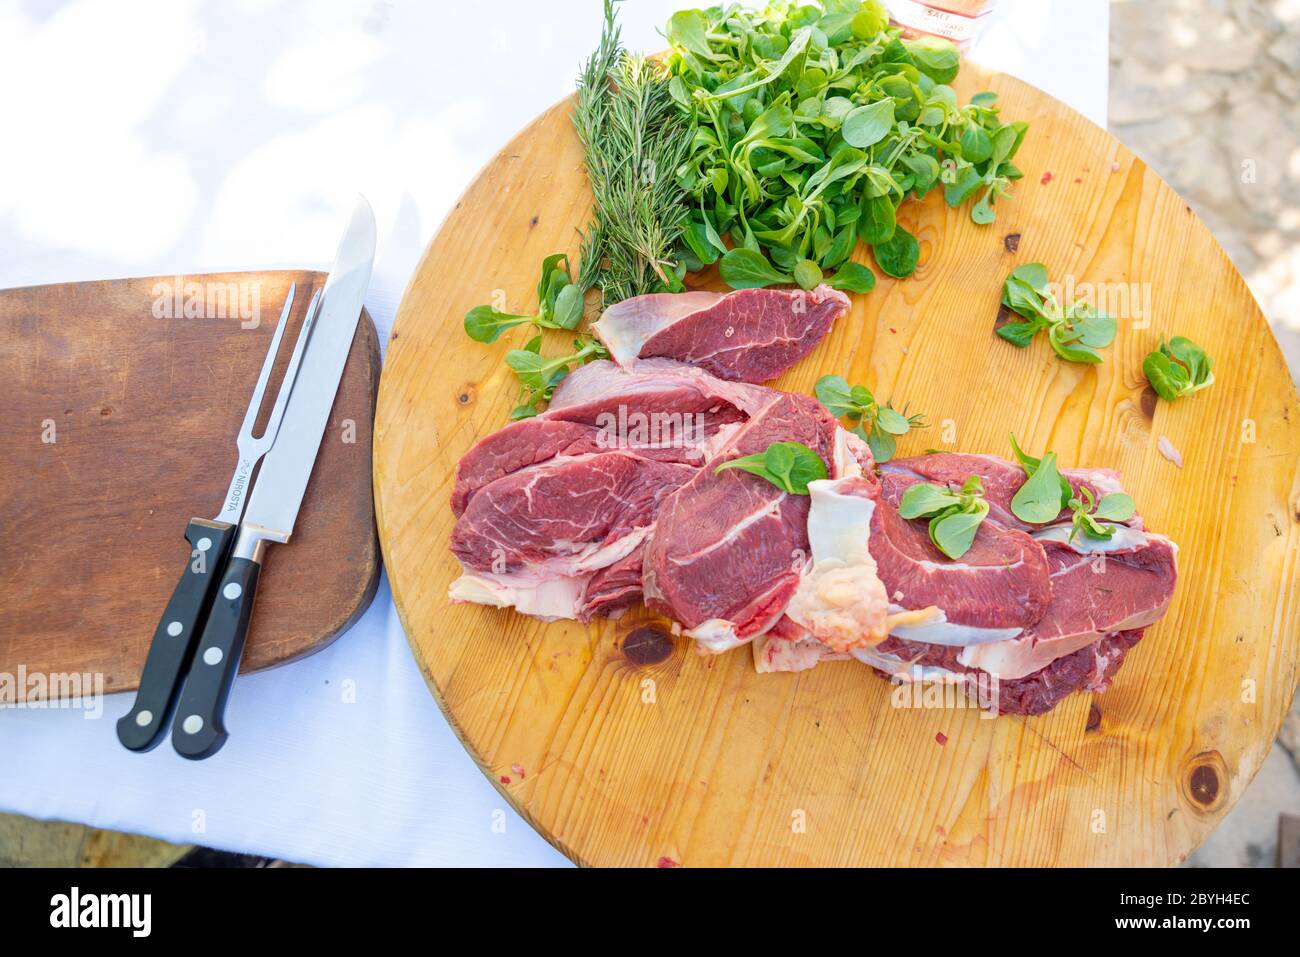 https://c8.alamy.com/comp/2BYH4EC/italy-beef-steaks-on-a-cutting-board-waiting-to-be-placed-on-the-barbeque-grill-steaks-with-salad-and-steak-knives-2BYH4EC.jpg